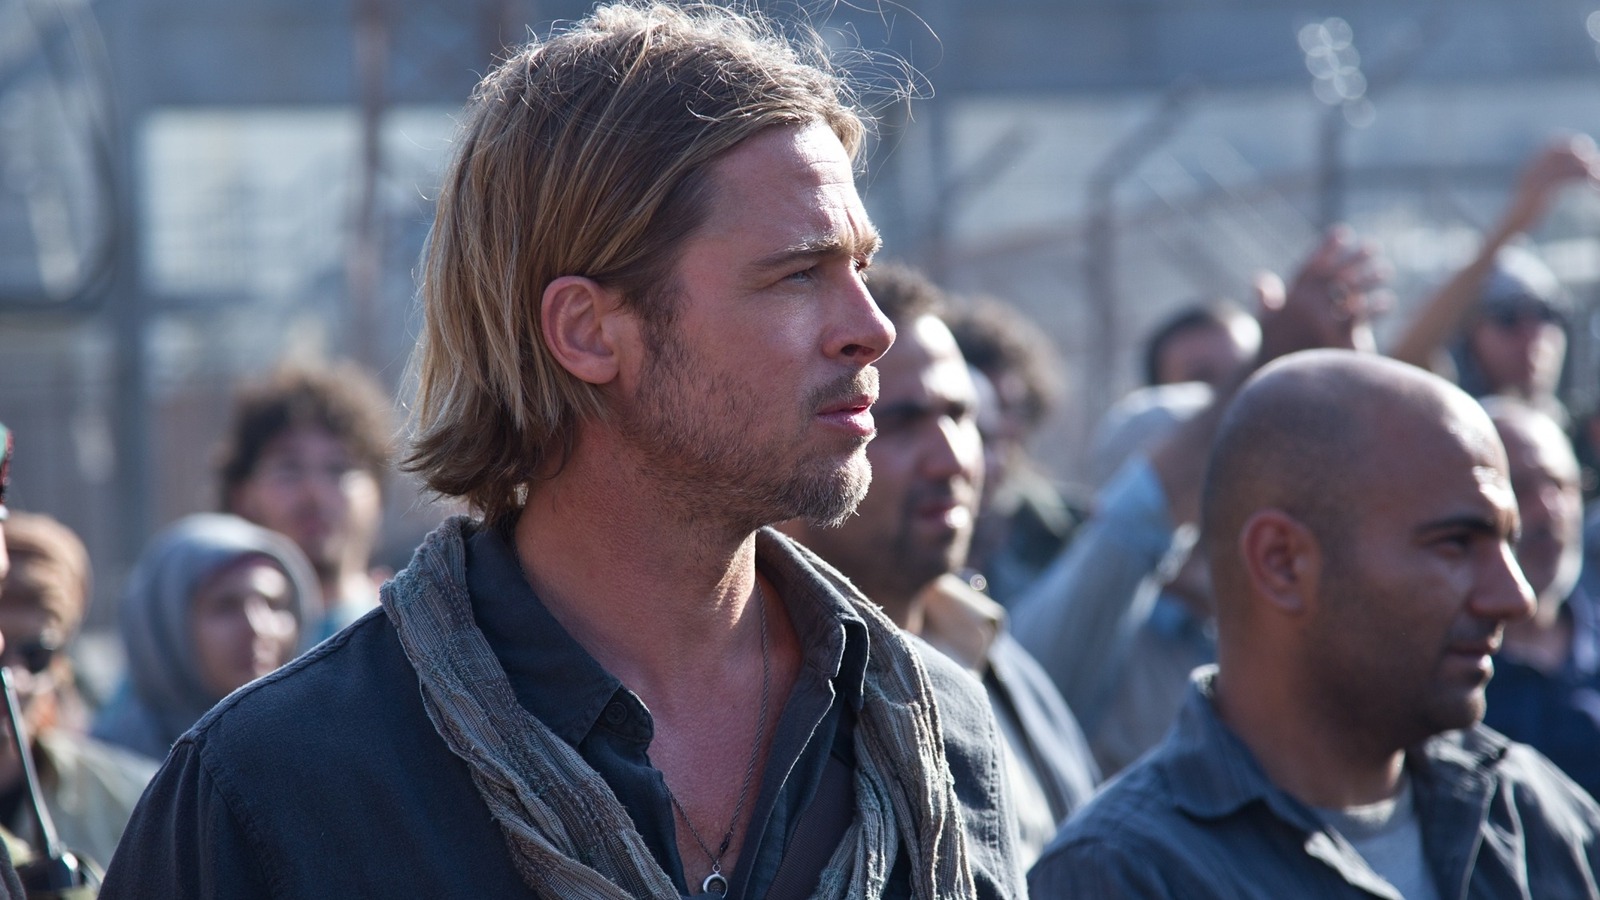 Everything You Need to Know About World War Z 2 Movie (Shutdown)